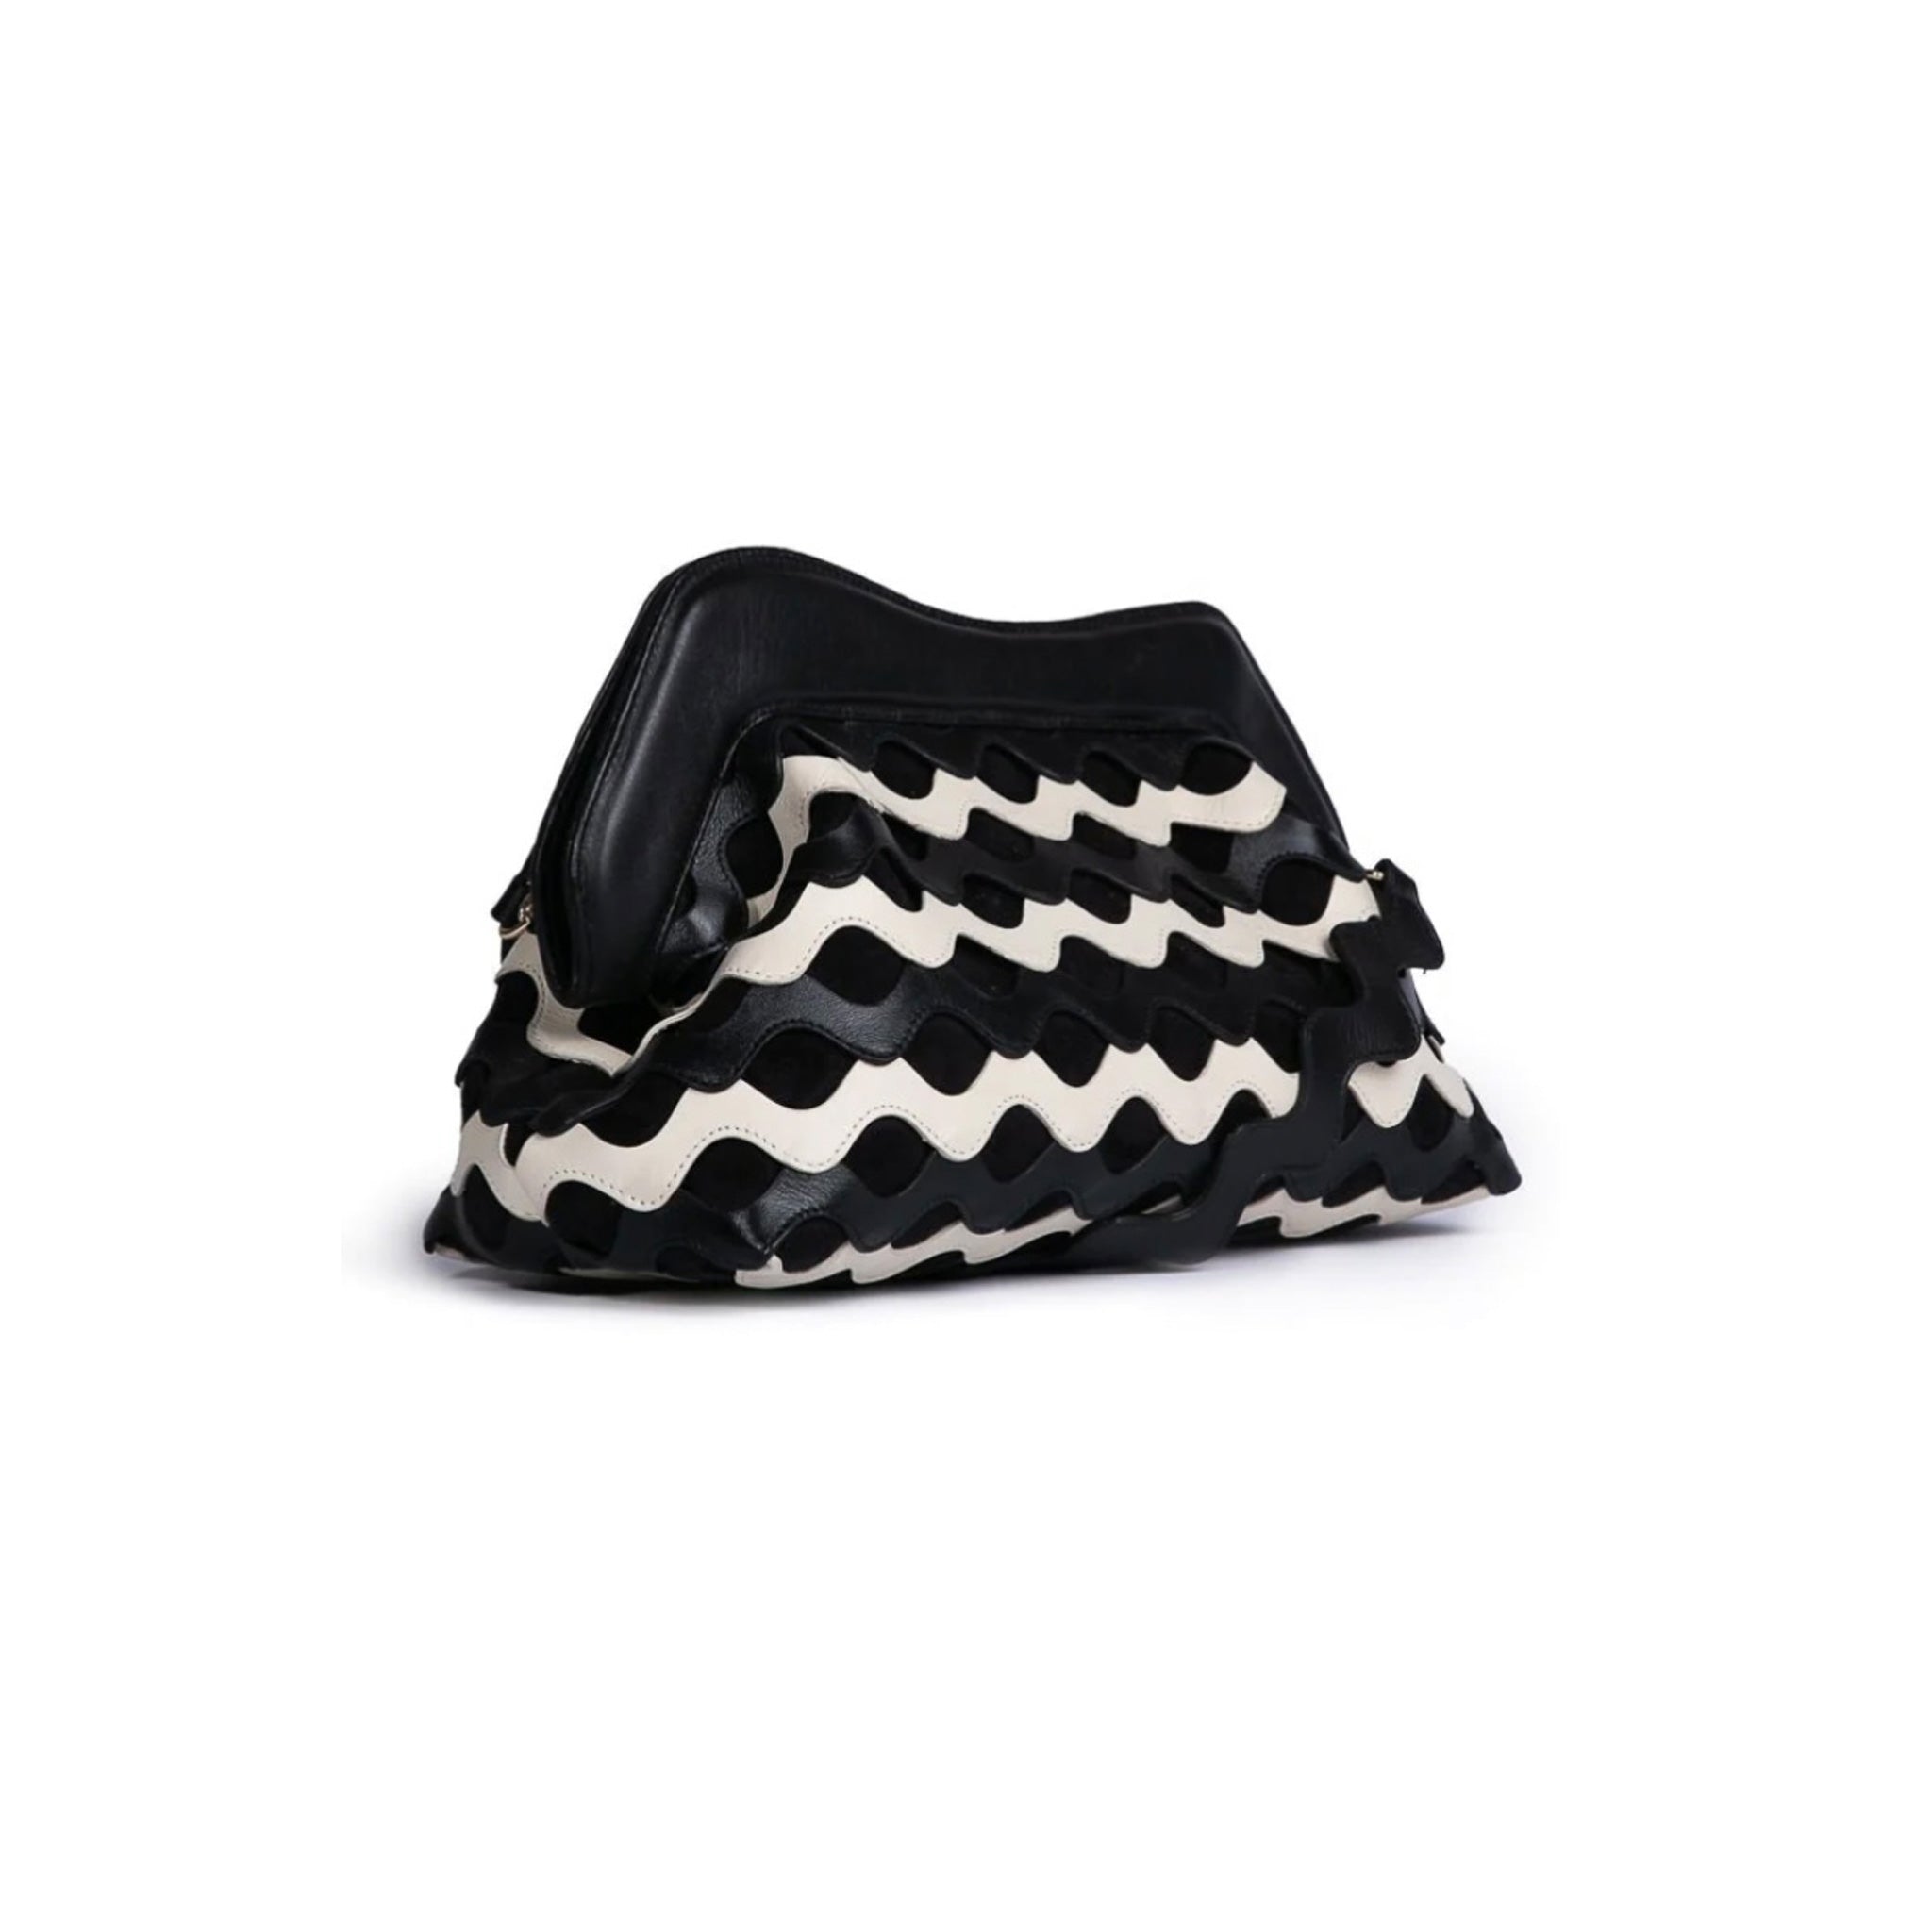 Waves Clutch in Off-White and Black